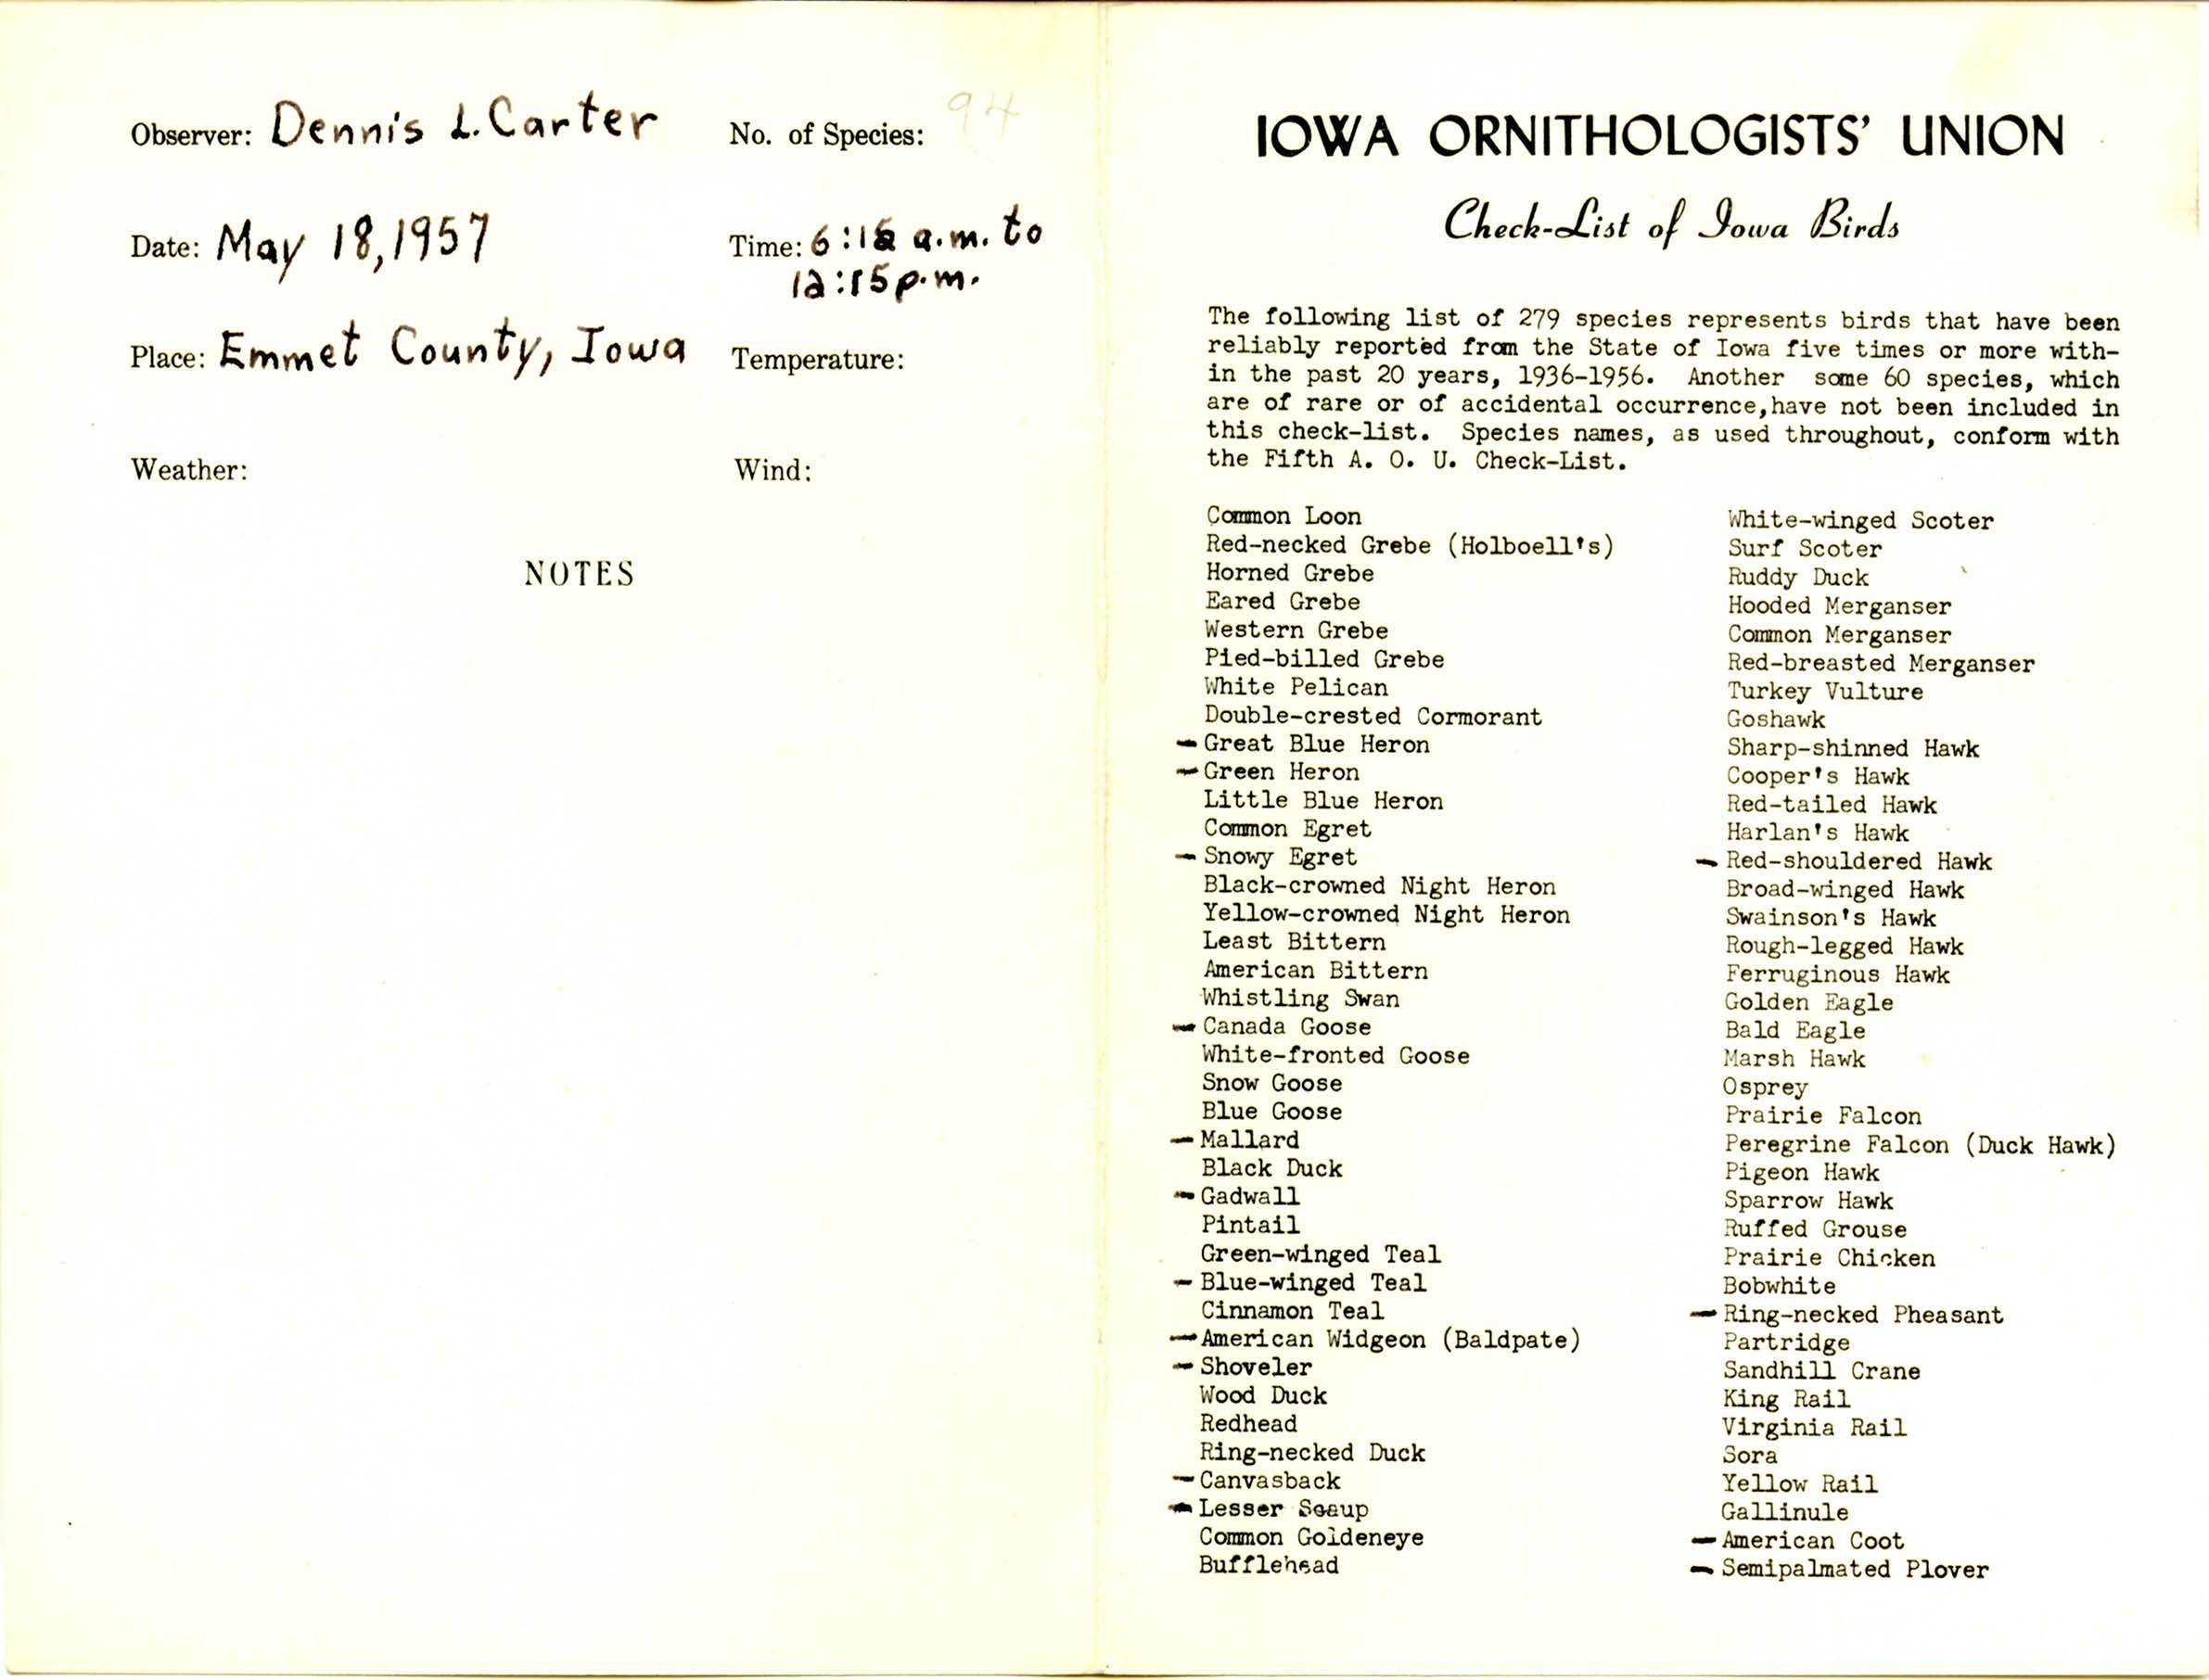 Check-list of Iowa Birds compiled by Dennis L. Carter, May 18, 1957